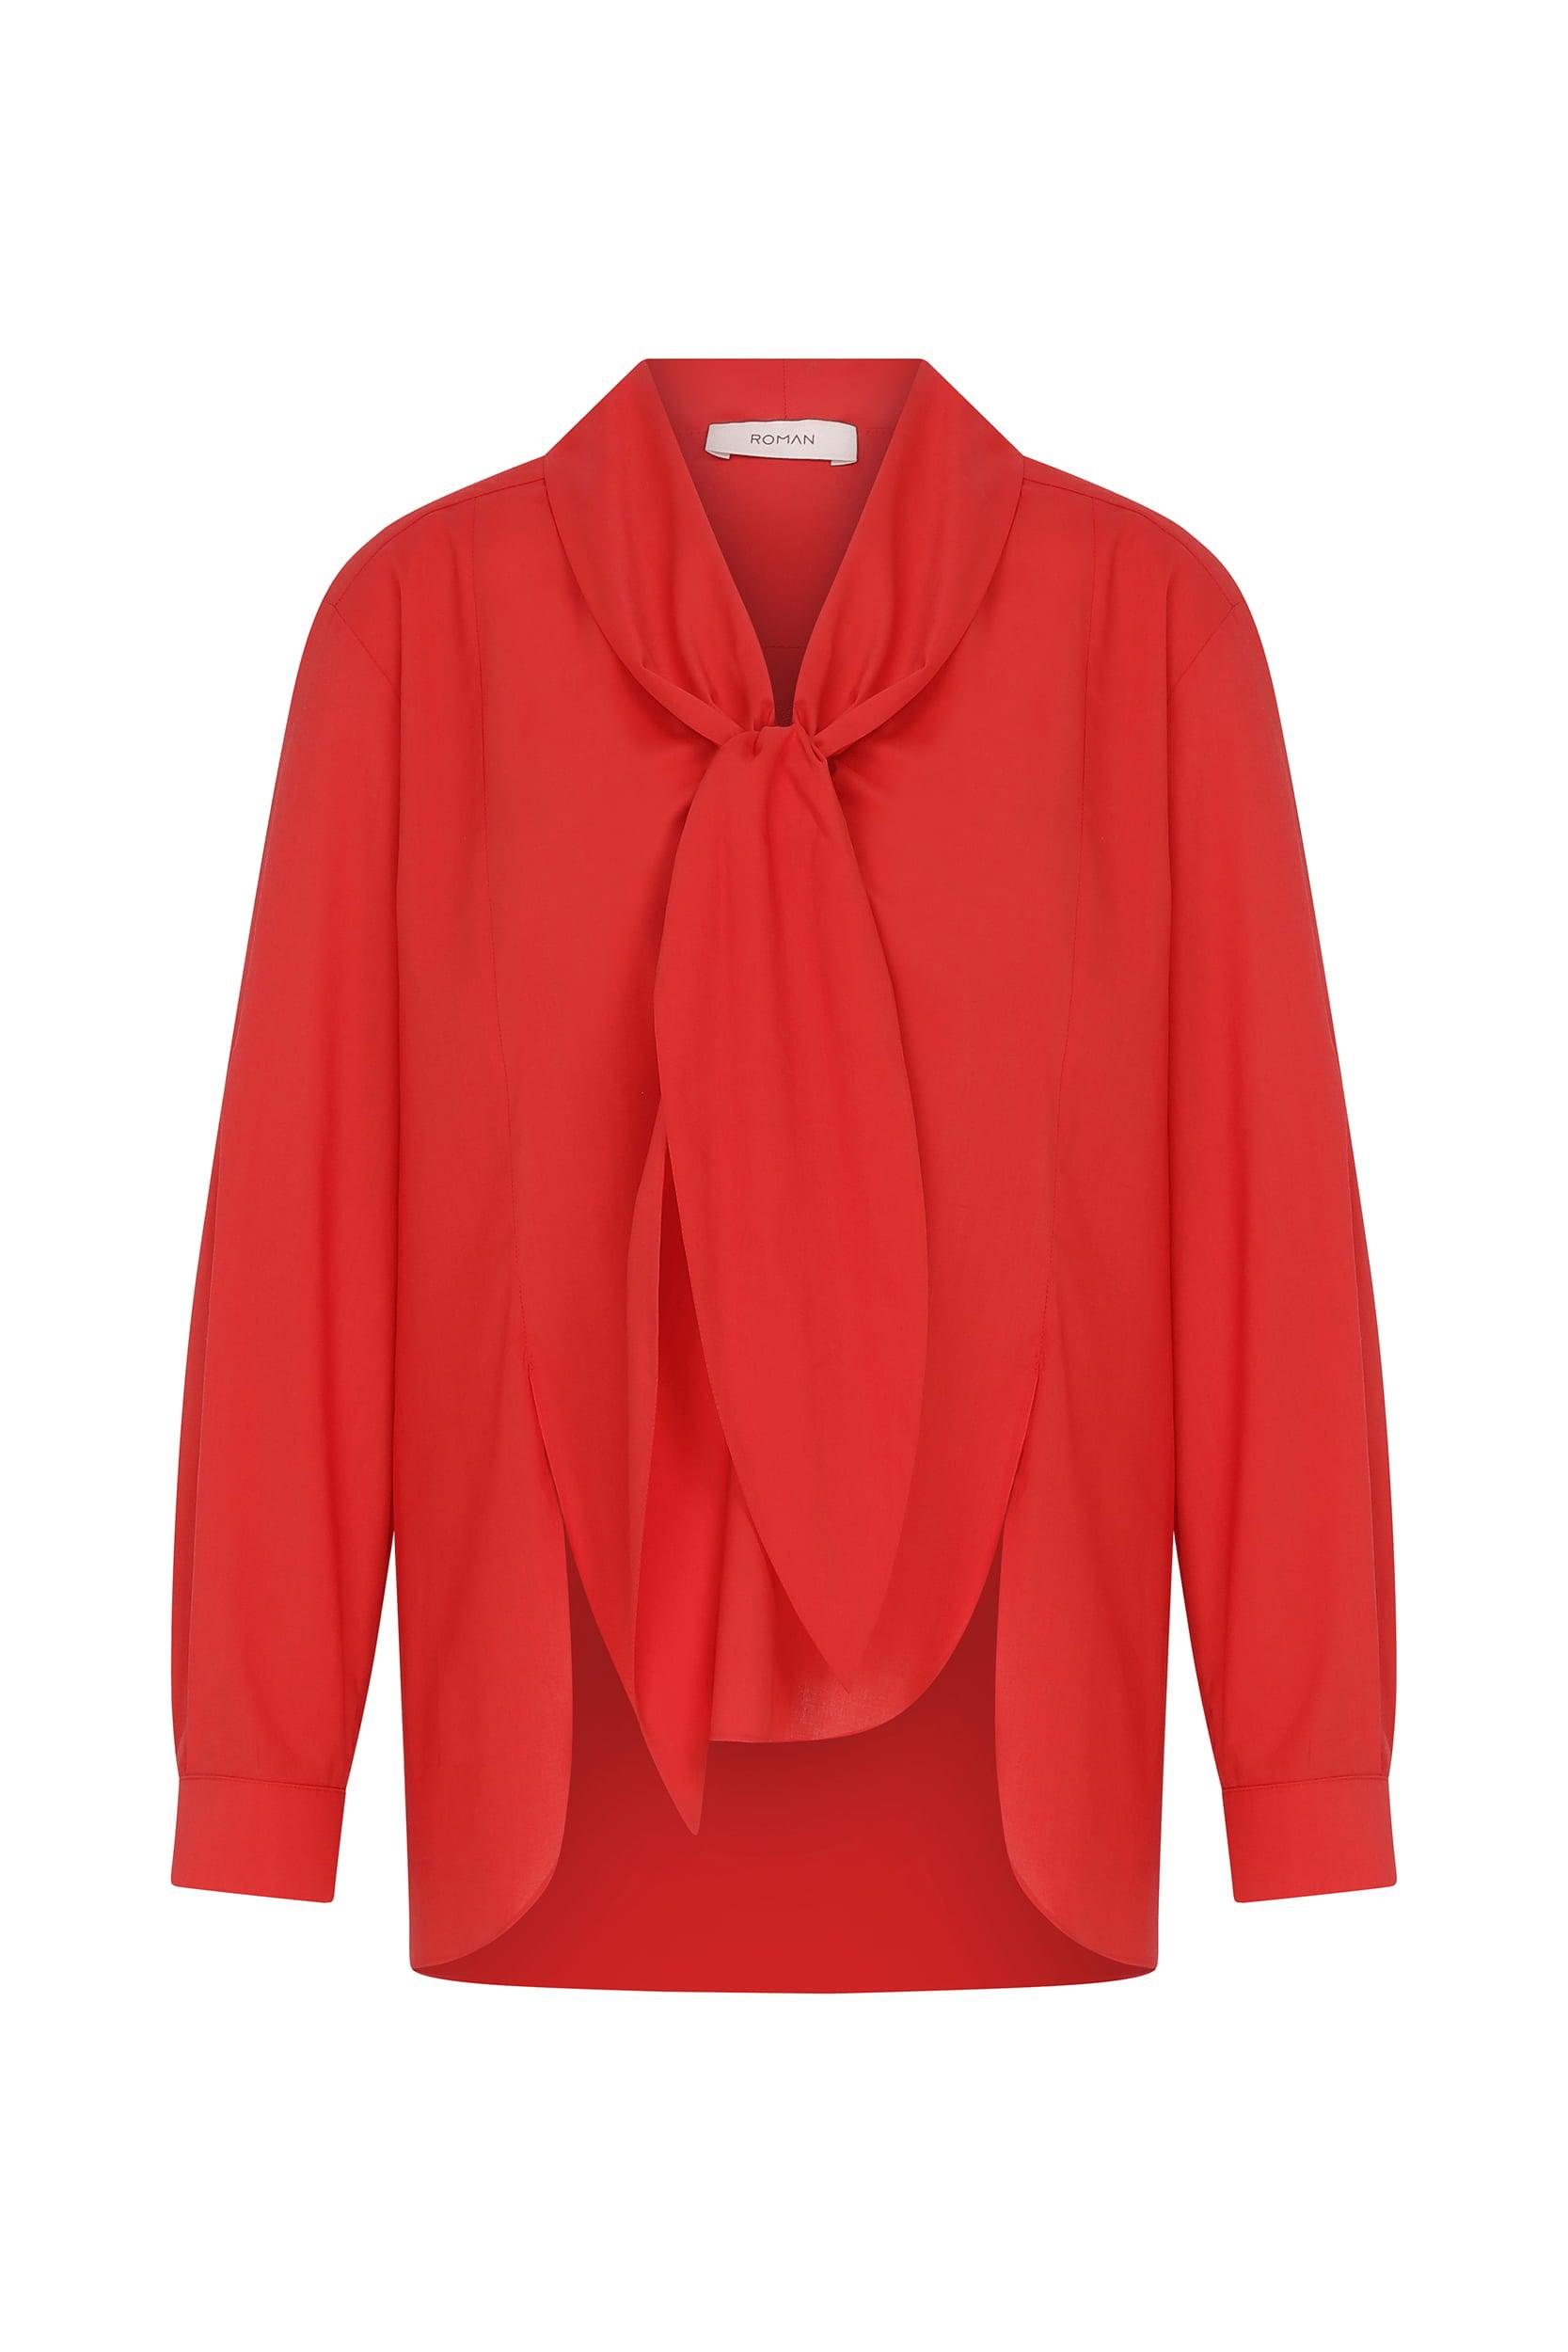 Neck Tie Deatiled Shirt -- [RED]